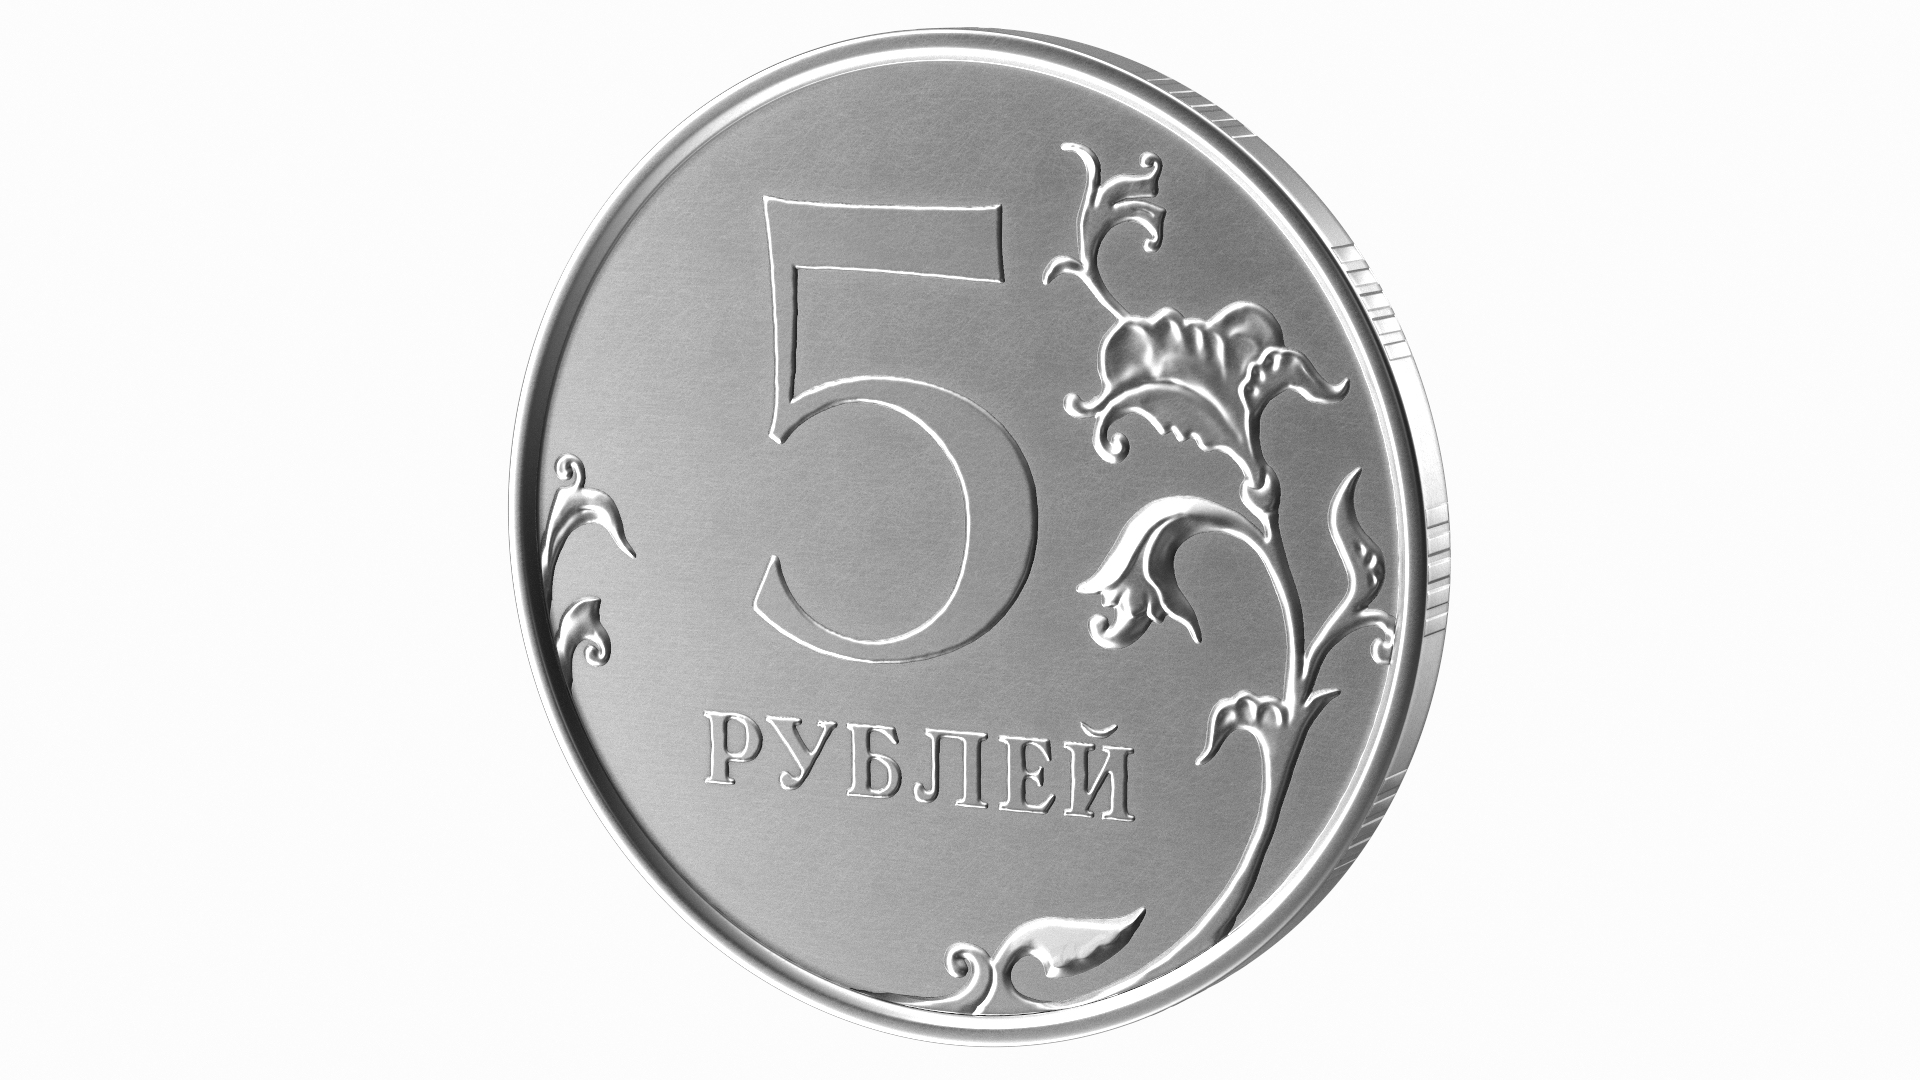 Russian Ruble Coins Collection 3 3D model https://p.turbosquid.com/ts-thumb/l4/g7CpGF/G0/russian_5_rubles_coin_360/jpg/1666775643/1920x1080/turn_fit_q99/e83ed61e70275619700419e4cb55f266de71f435/russian_5_rubles_coin_360-1.jpg